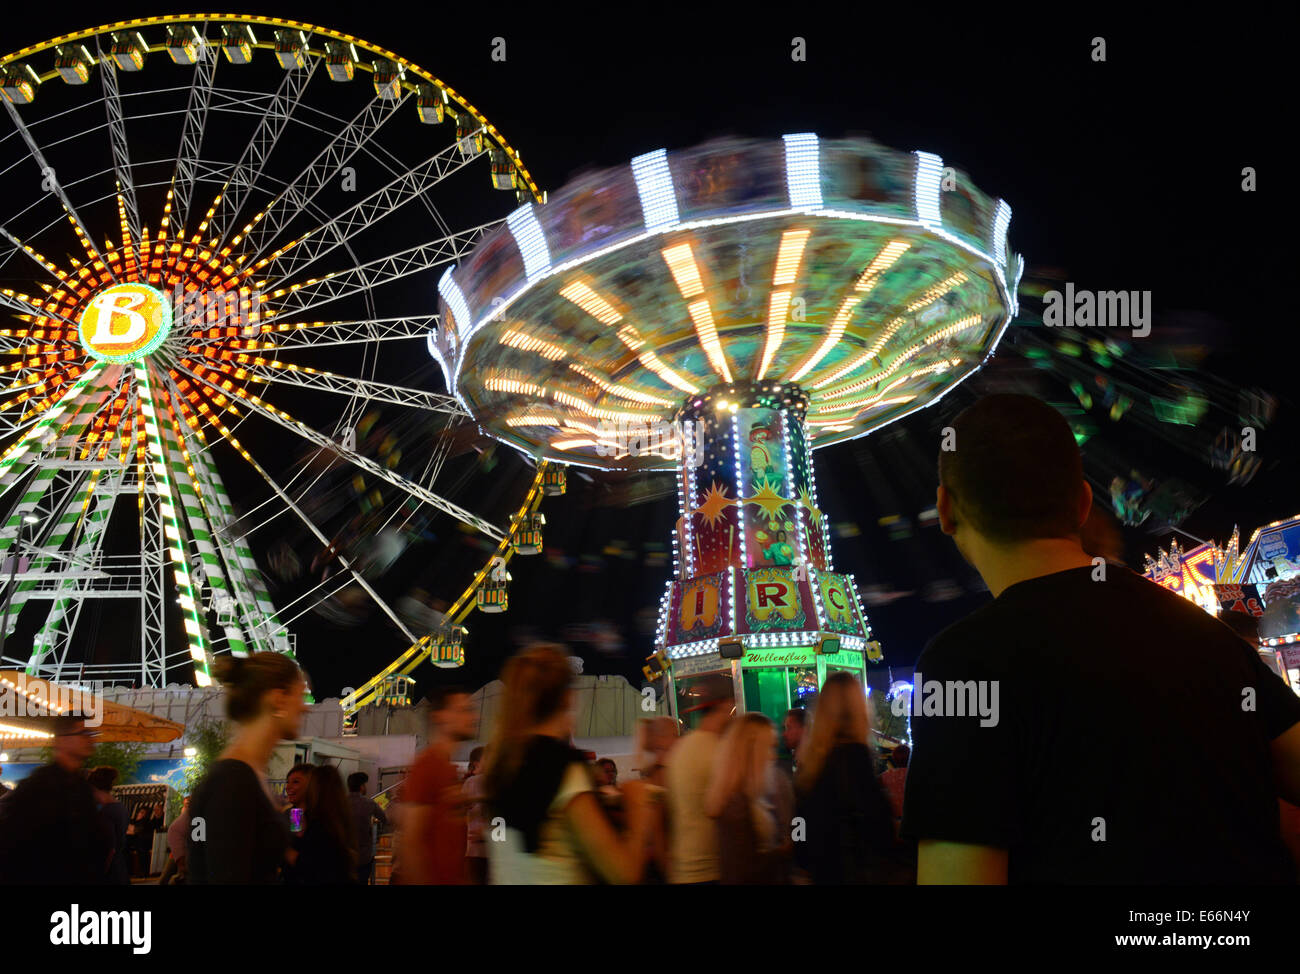 Herne, Germany. 9th Aug, 2014. Visitors walk past an illuminated chairoplane and a ferris wheel across the grounds of the Cranger fun fair in Herne, Germany, 9 August 2014. Photo: Caroline Seidel/dpa/Alamy Live News Stock Photo